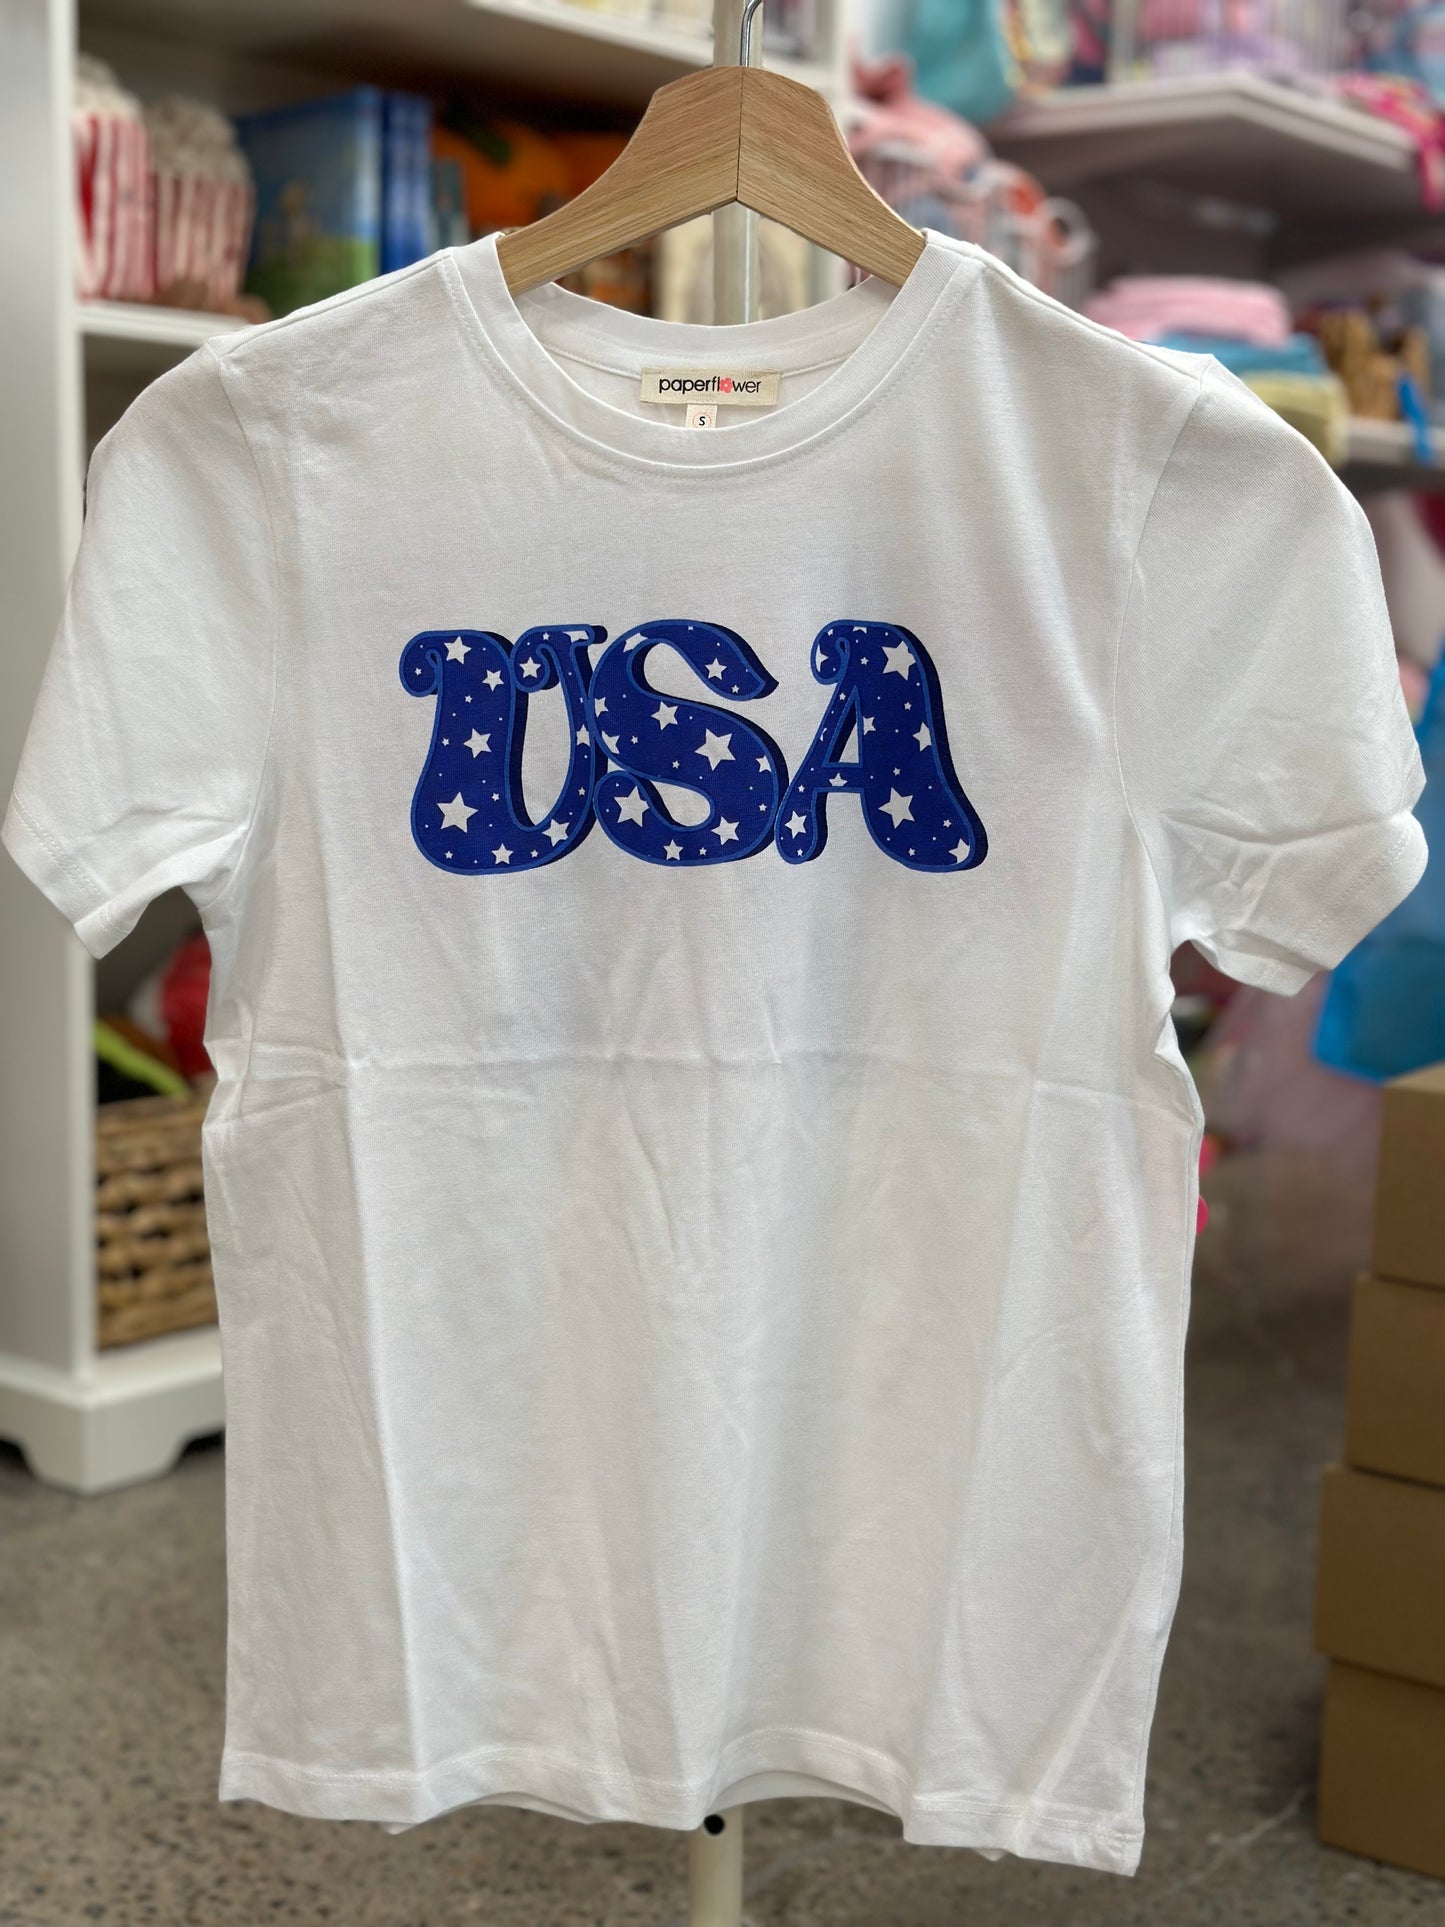 Party in The USA Tee